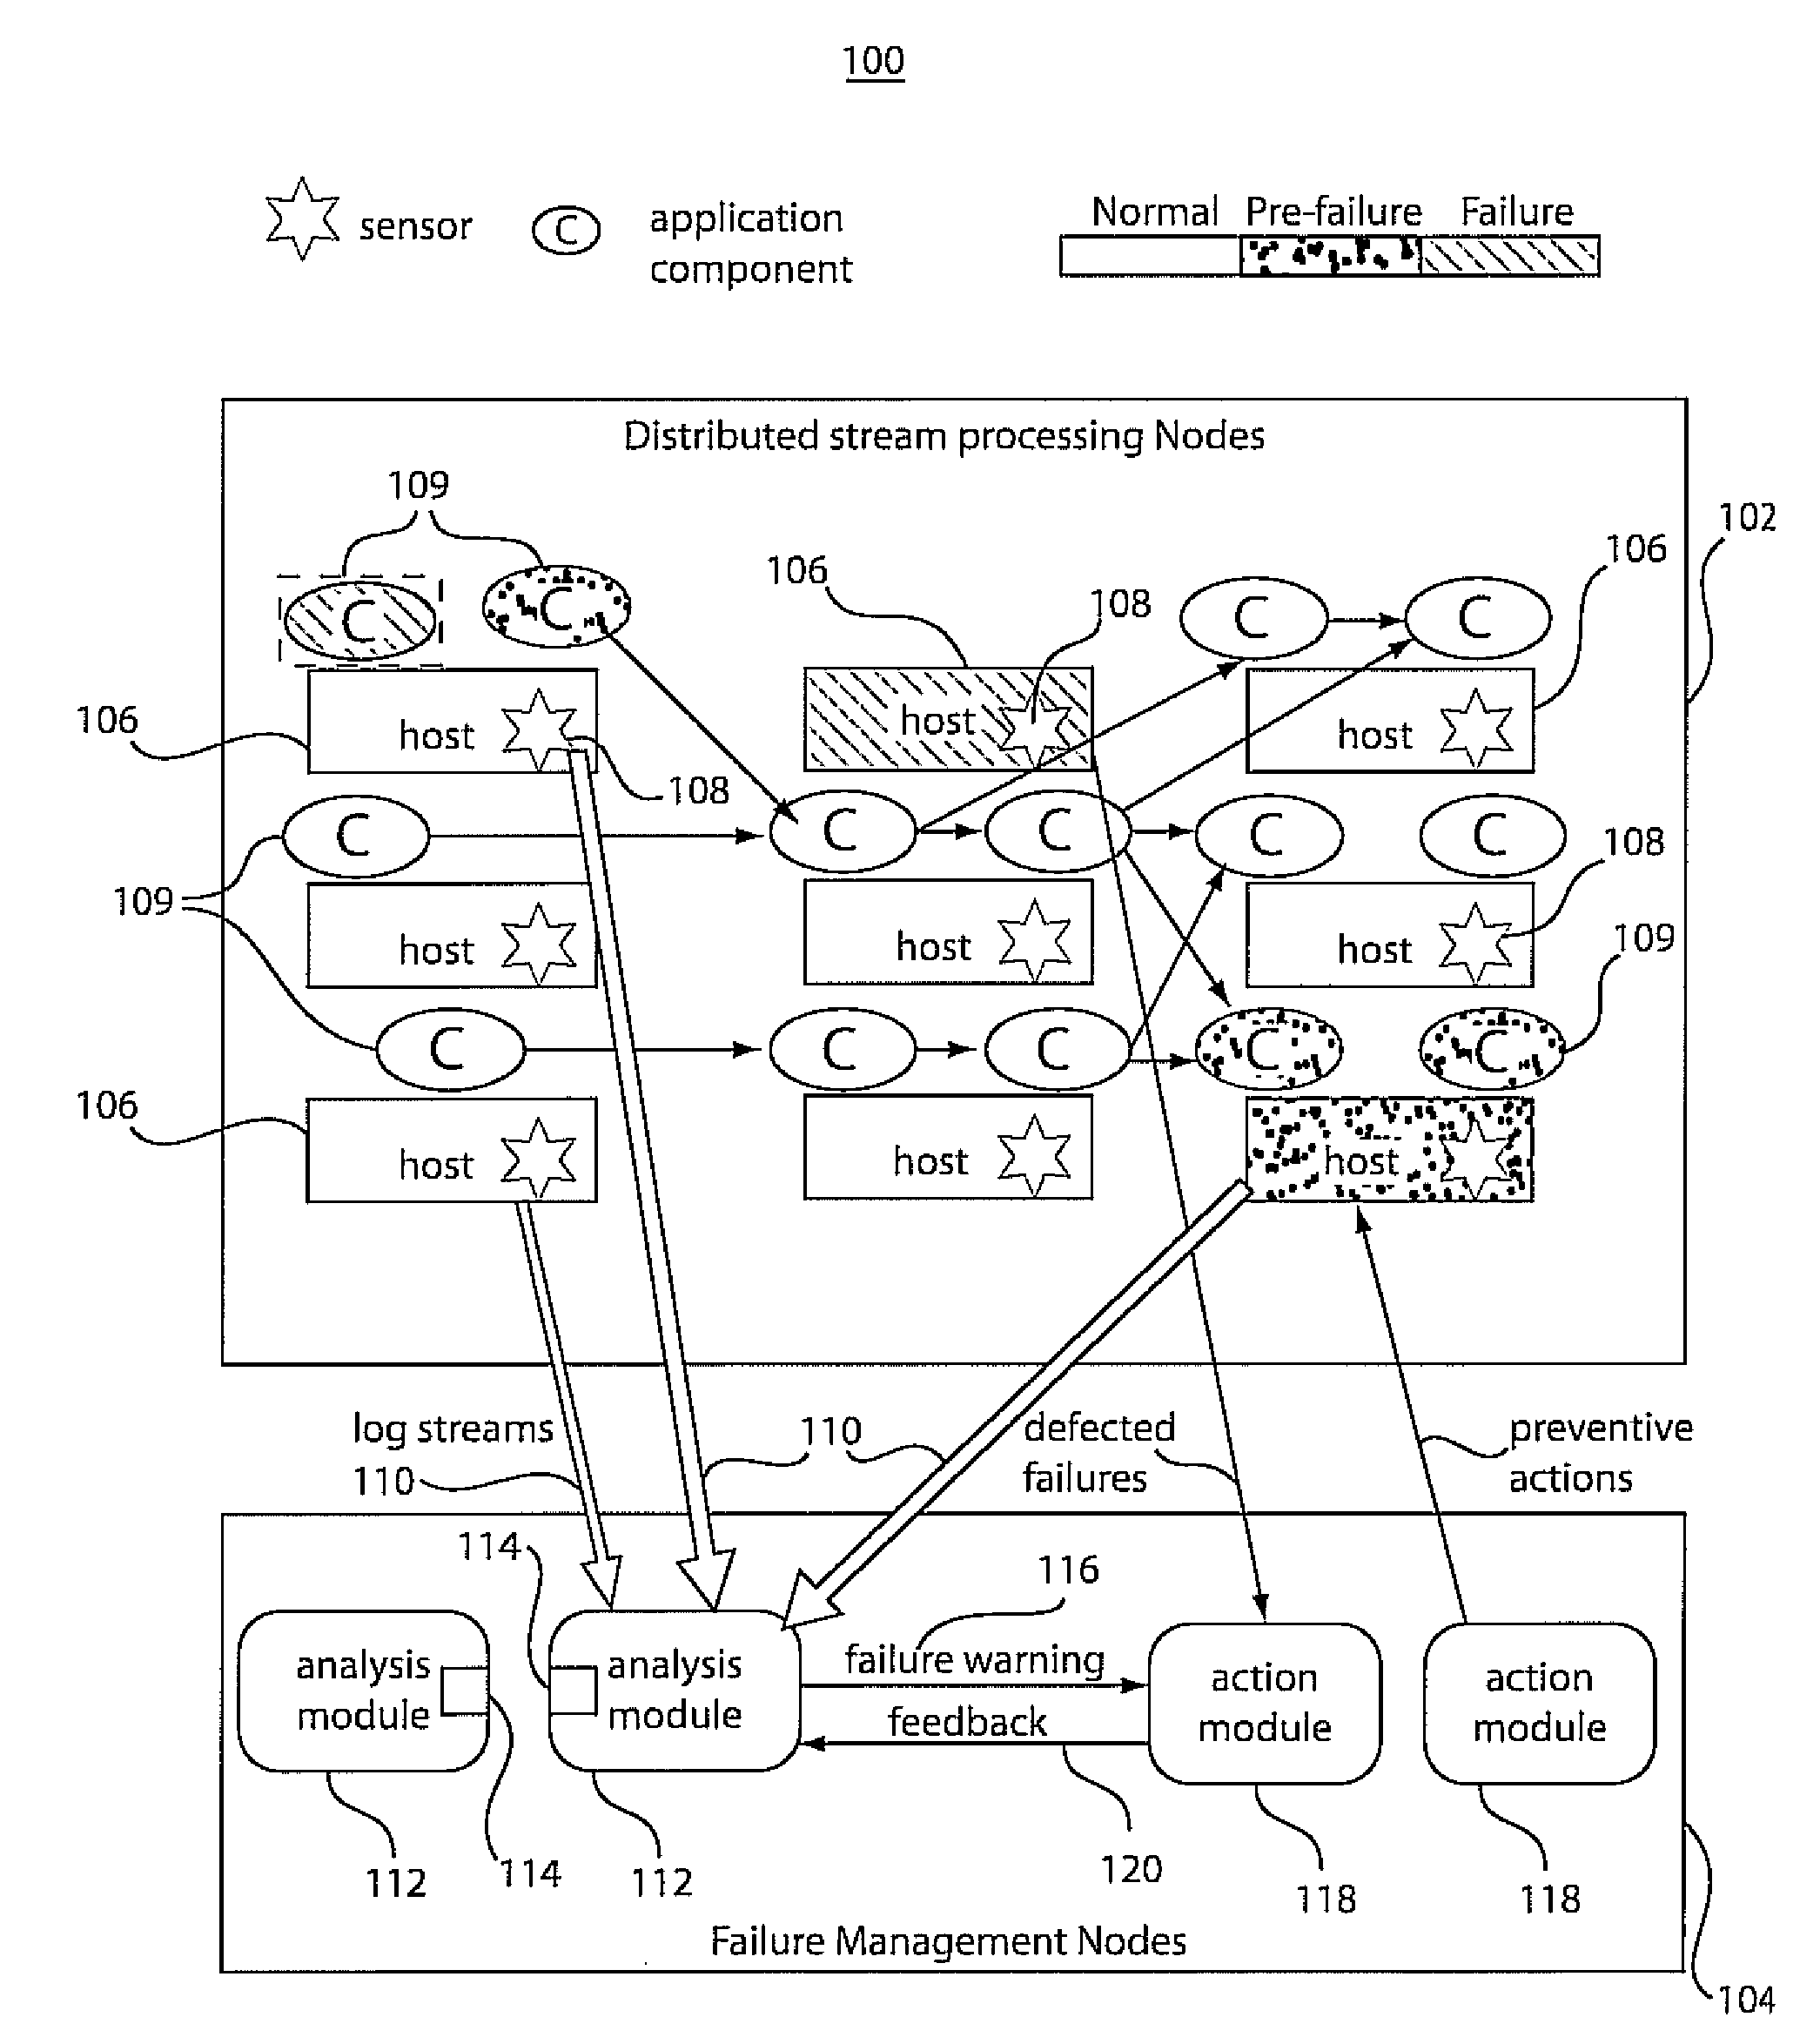 Systems and methods for predictive failure management